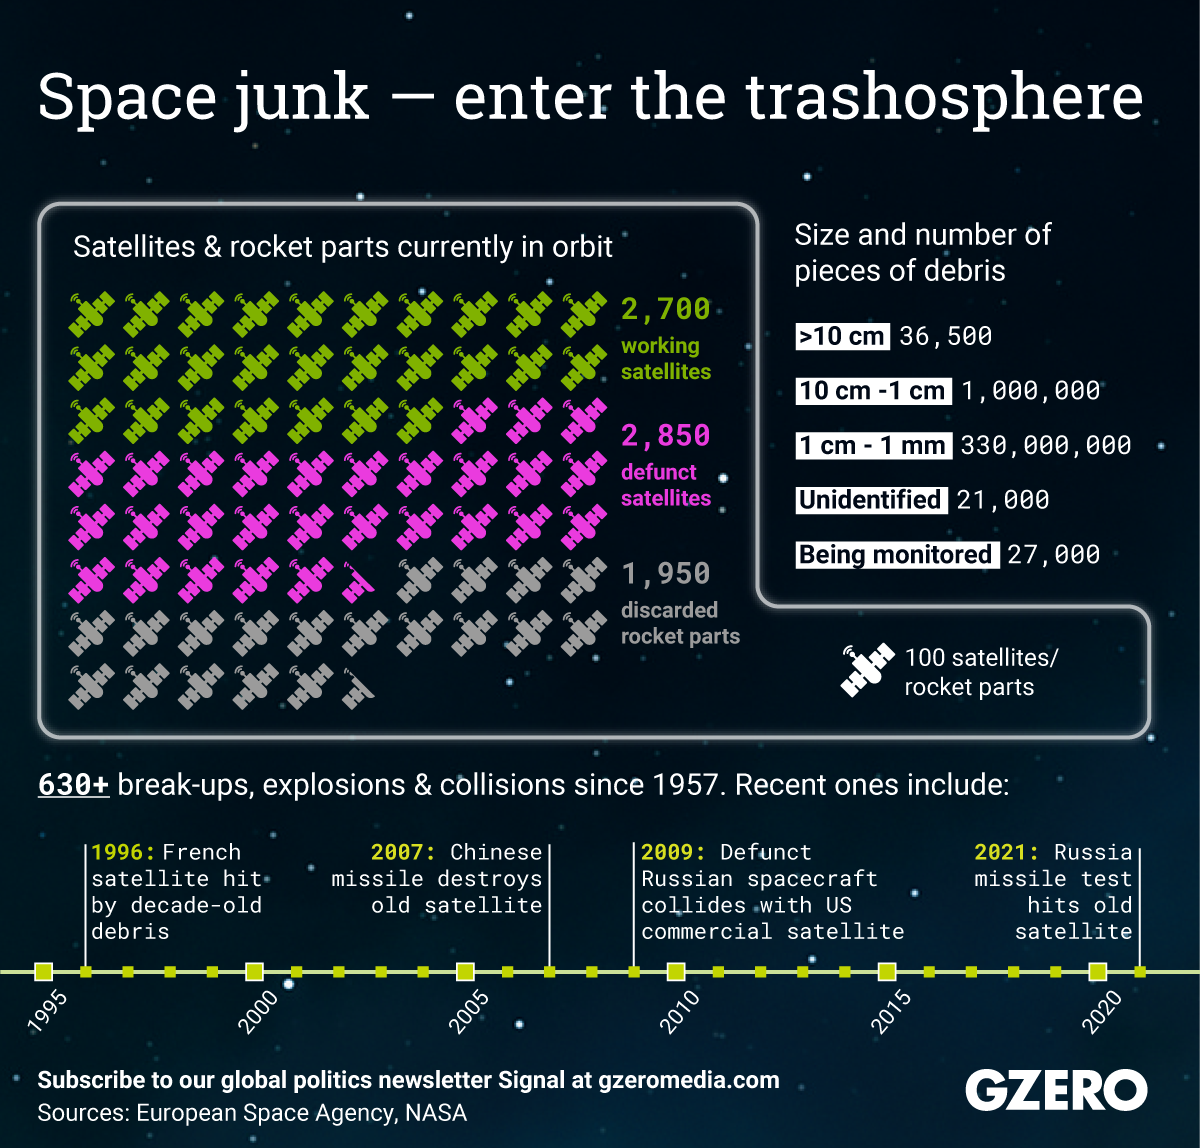 The Graphic Truth: Space junk — enter the trashosphere